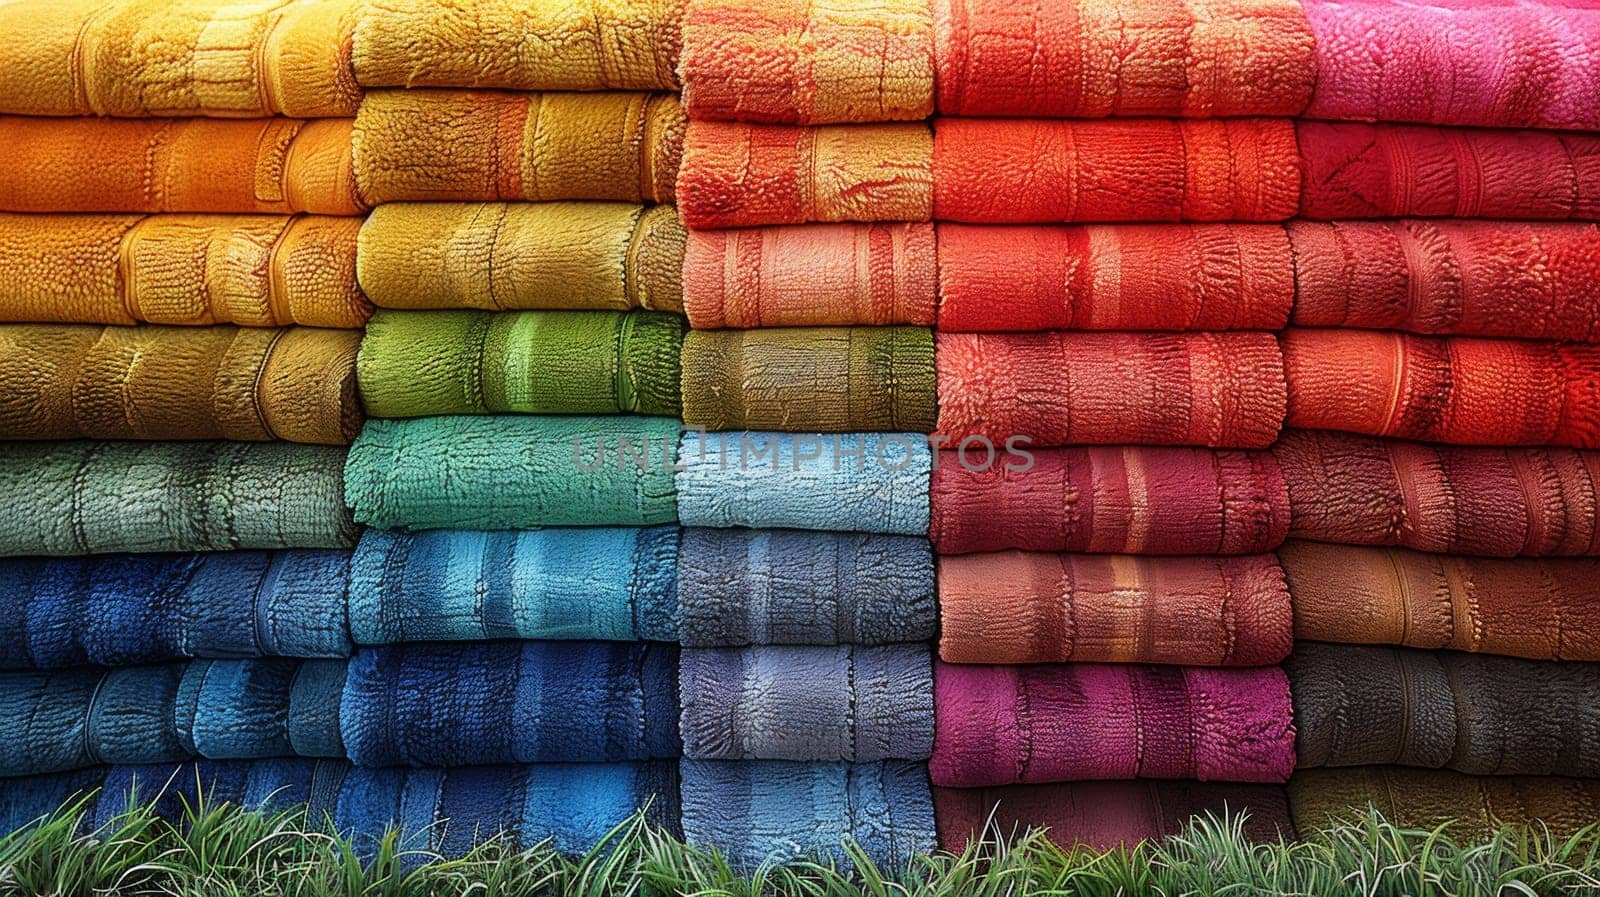 A stack of colorful towels stacked on top of each other